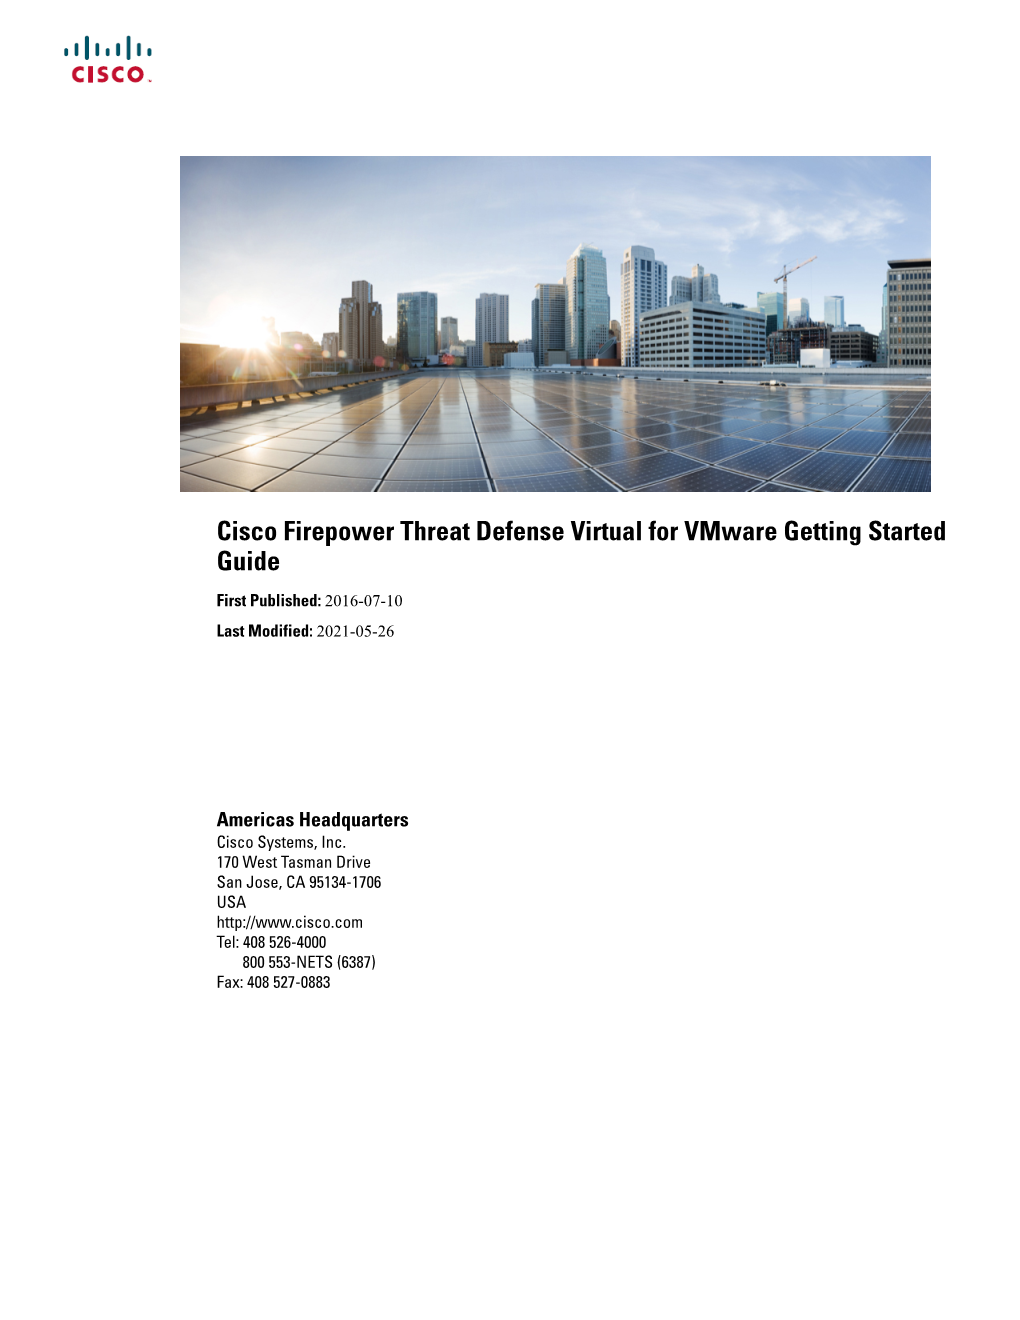 Cisco Firepower Threat Defense Virtual for Vmware Getting Started Guide